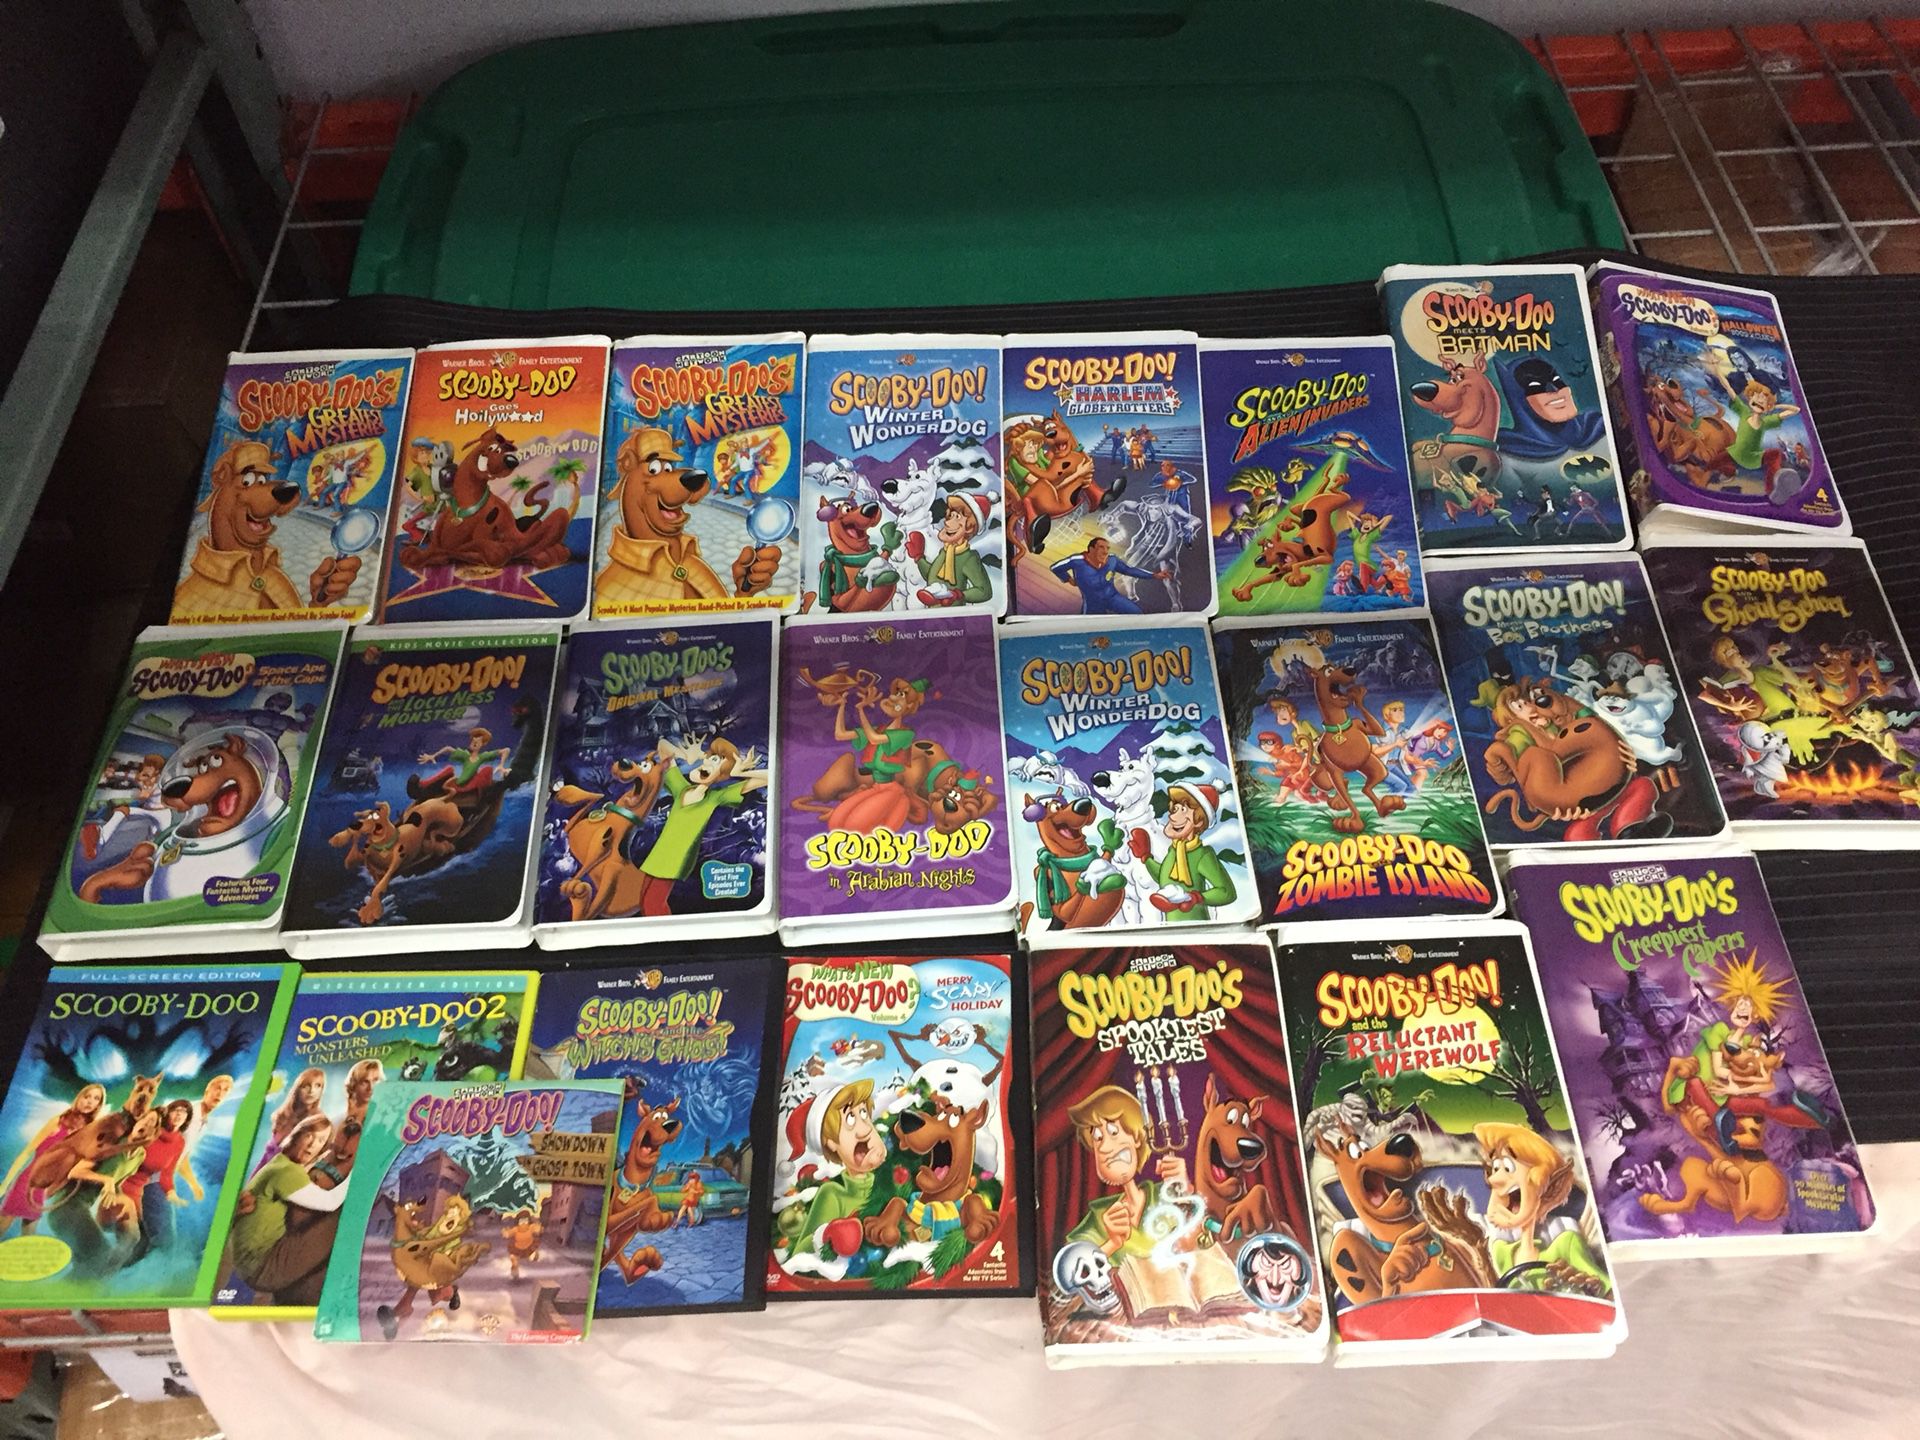 Huge Scooby Doo VHS and DVD Movie collection.